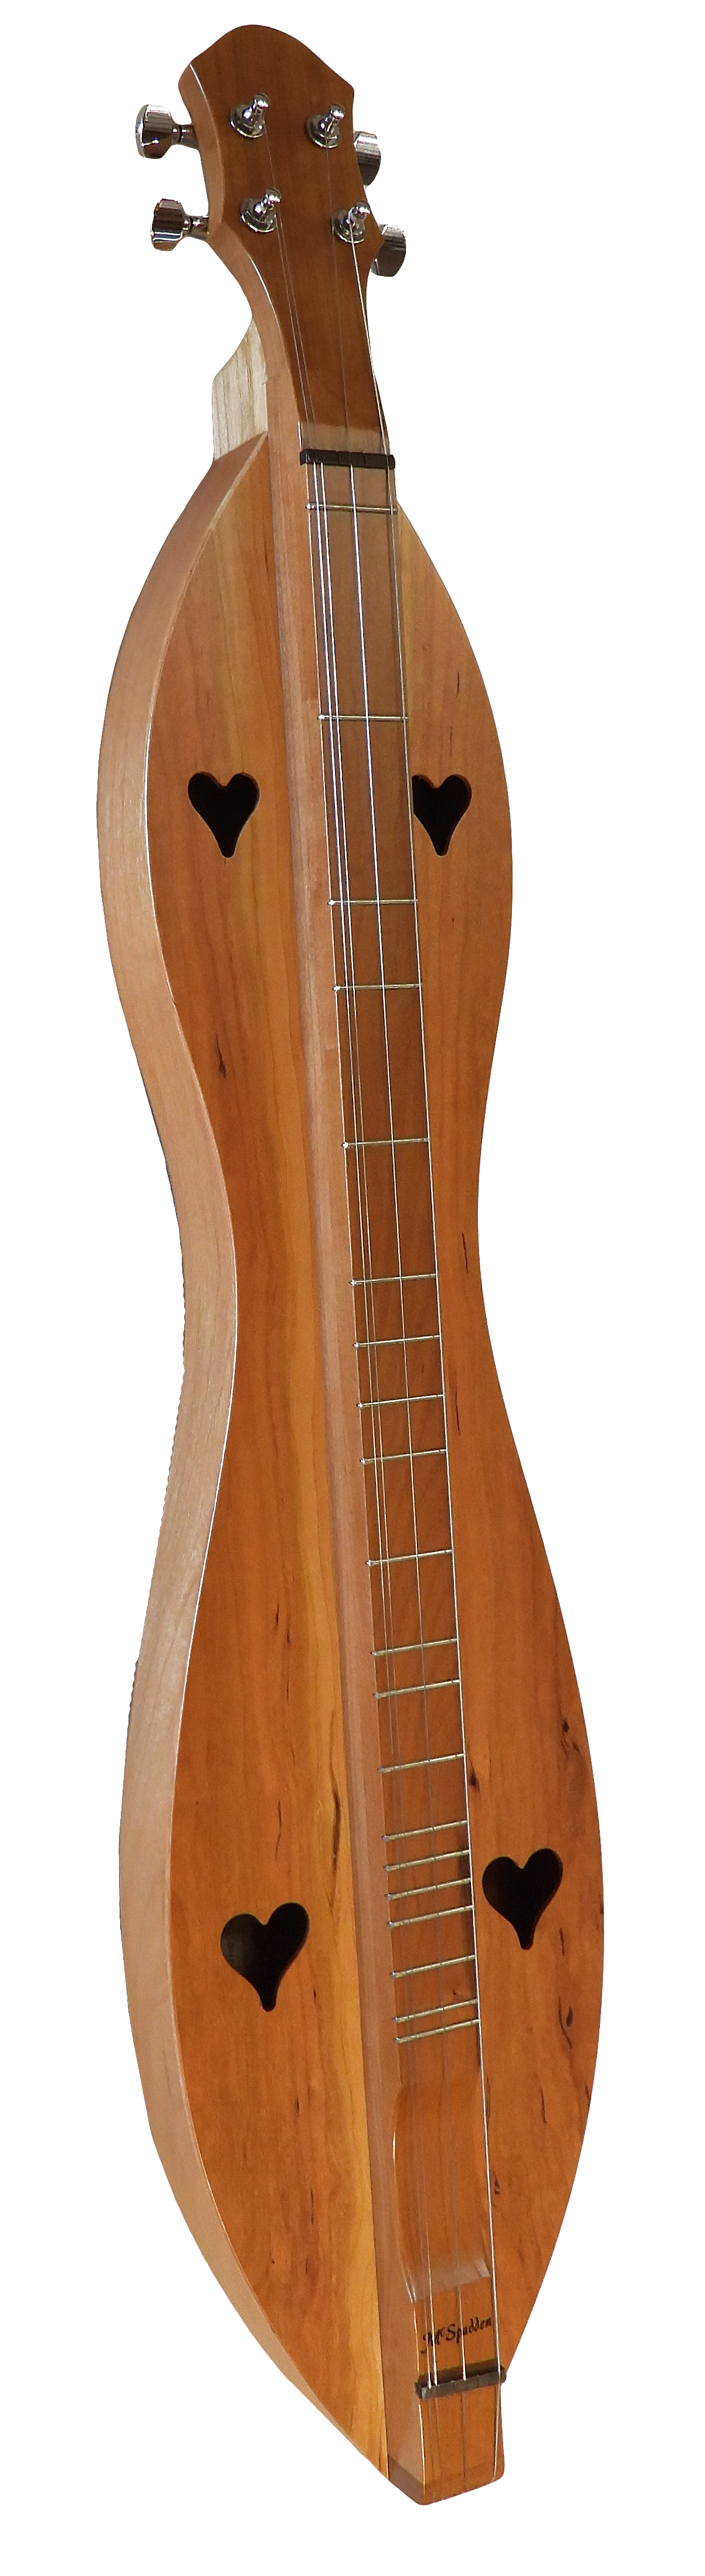 A 4 String, Flathead, Hourglass with Cherry back, sides and top ukulele with two birds on it. This beautifully crafted 4 String, Flathead, Hourglass with Cherry back, sides and top ukulele from McSpadden features a unique design showcasing two charming birds. It is built to last with a lifetime.